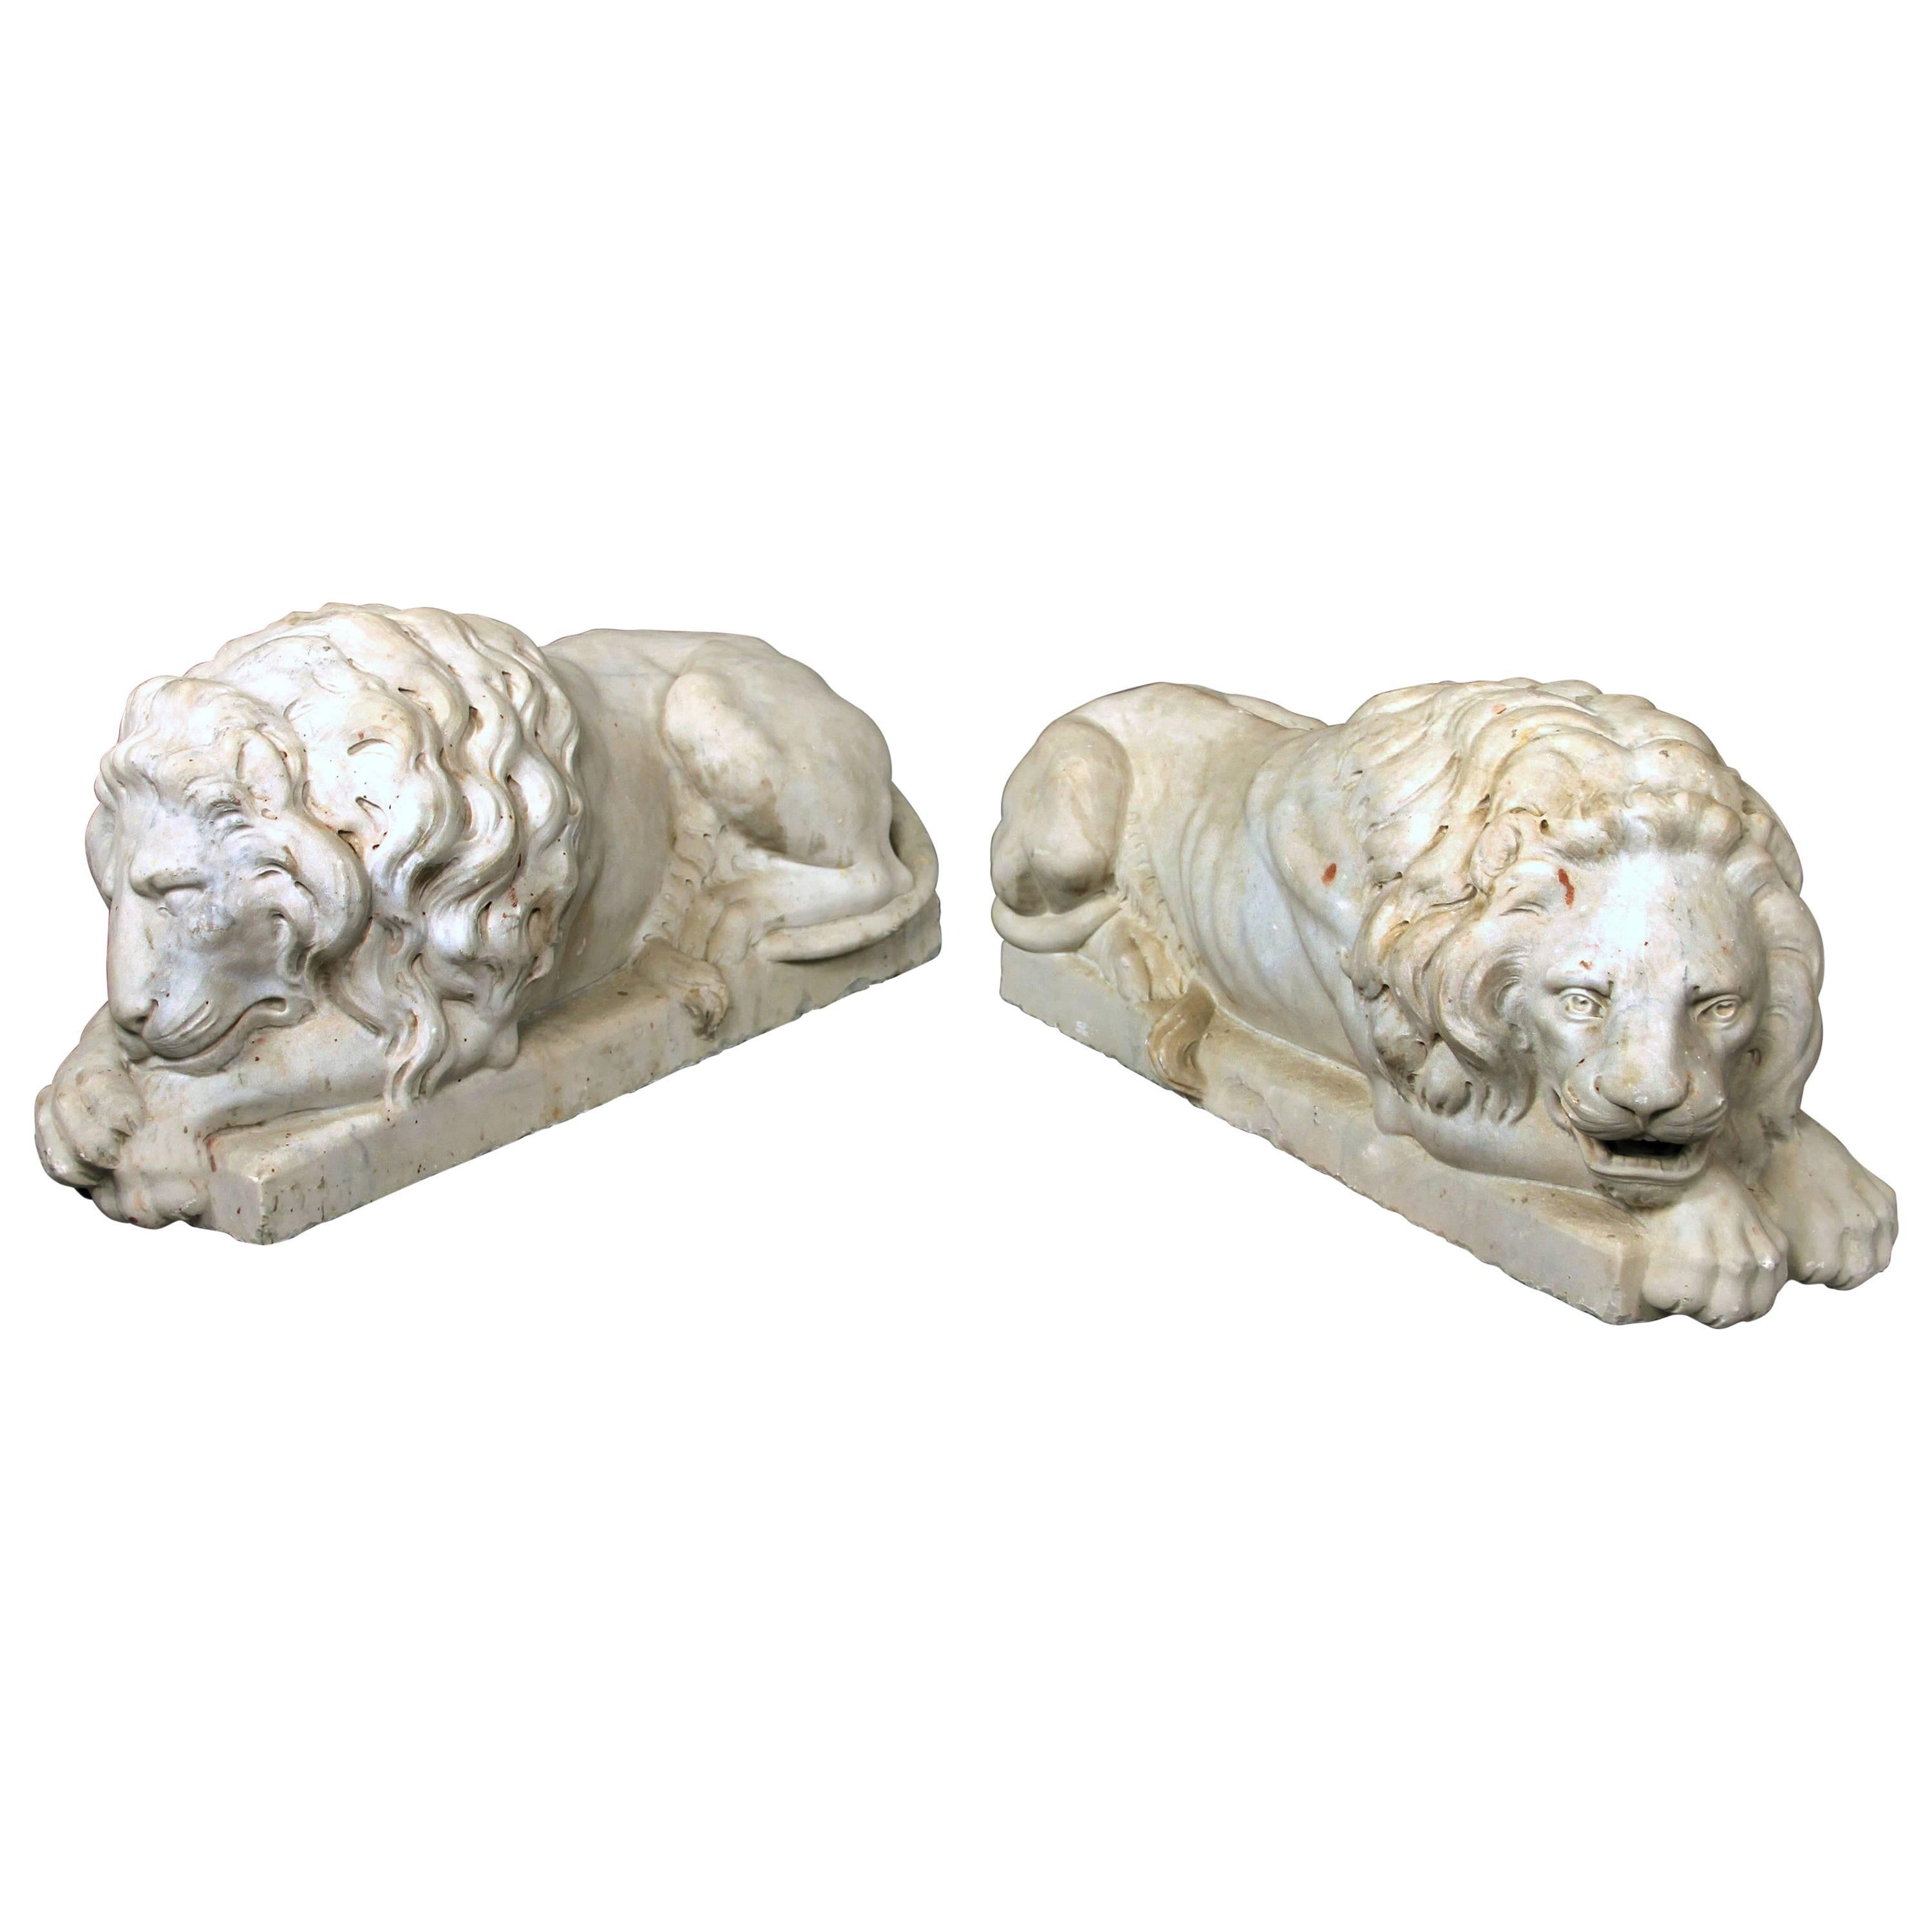 Nice Pair of Early 20th Century Large White Marble Recumbent Lions